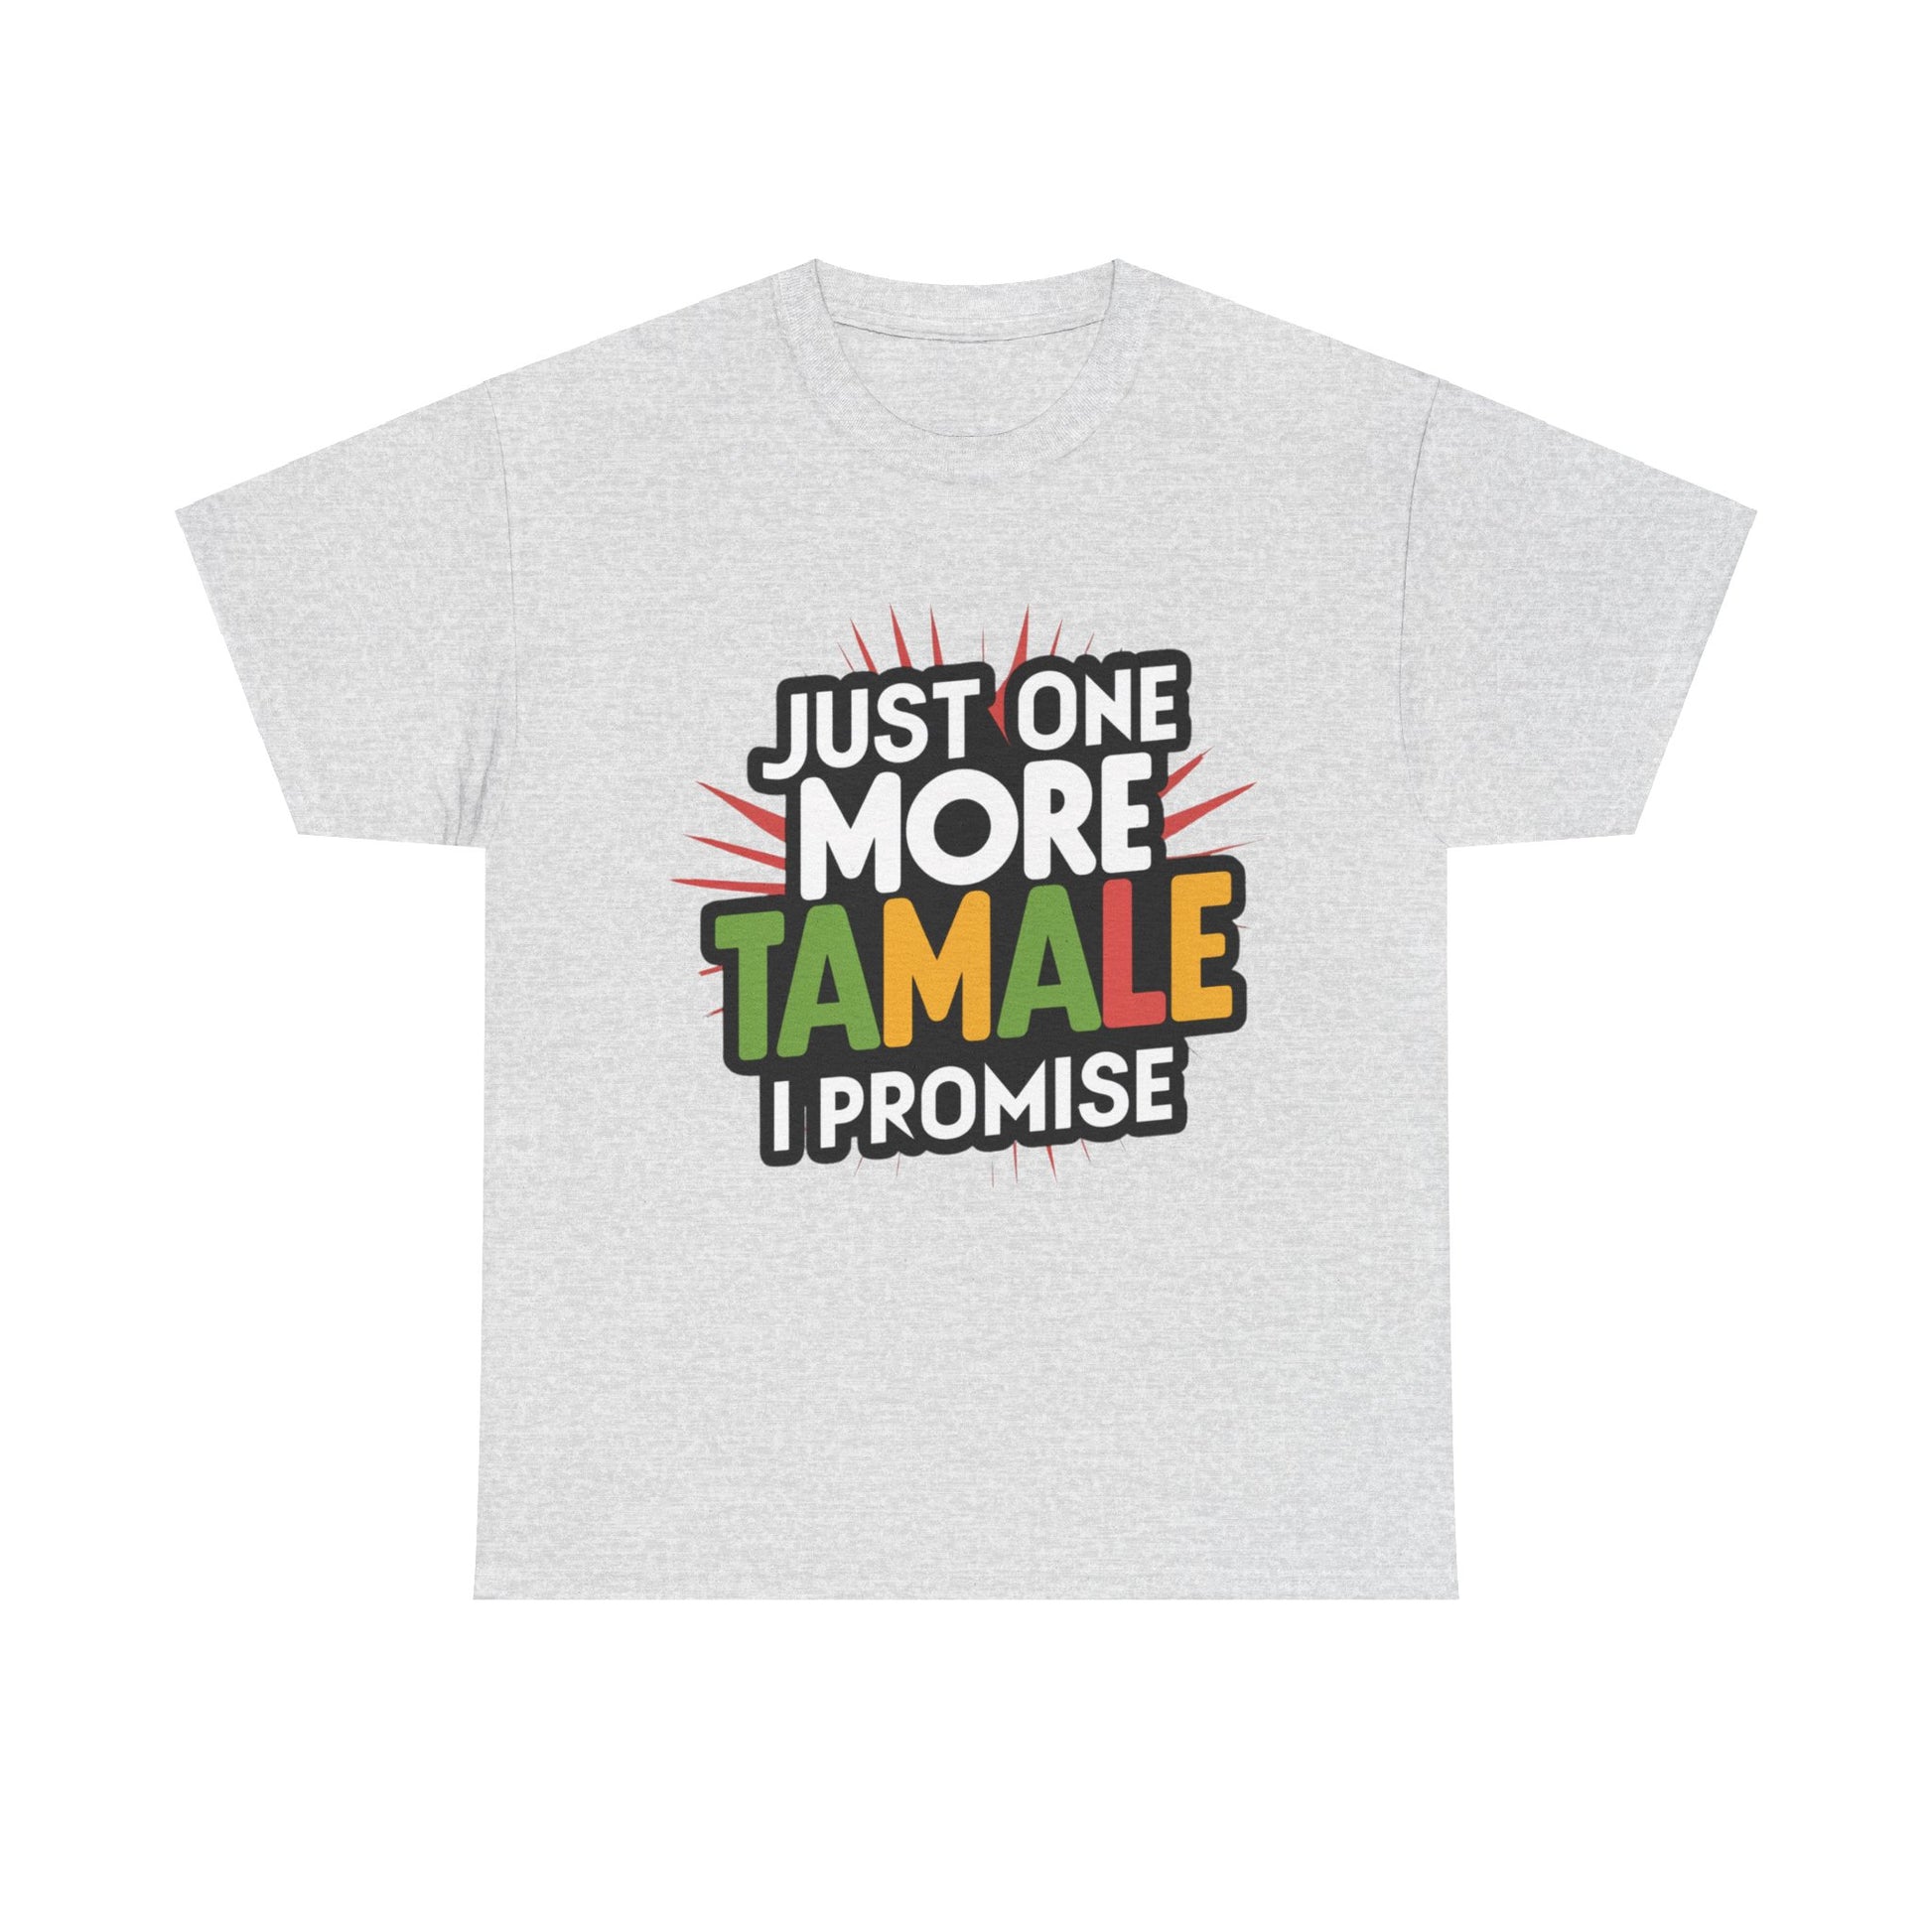 Just One More Tamale I Promise Mexican Food Graphic Unisex Heavy Cotton Tee Cotton Funny Humorous Graphic Soft Premium Unisex Men Women Ash T-shirt Birthday Gift-13